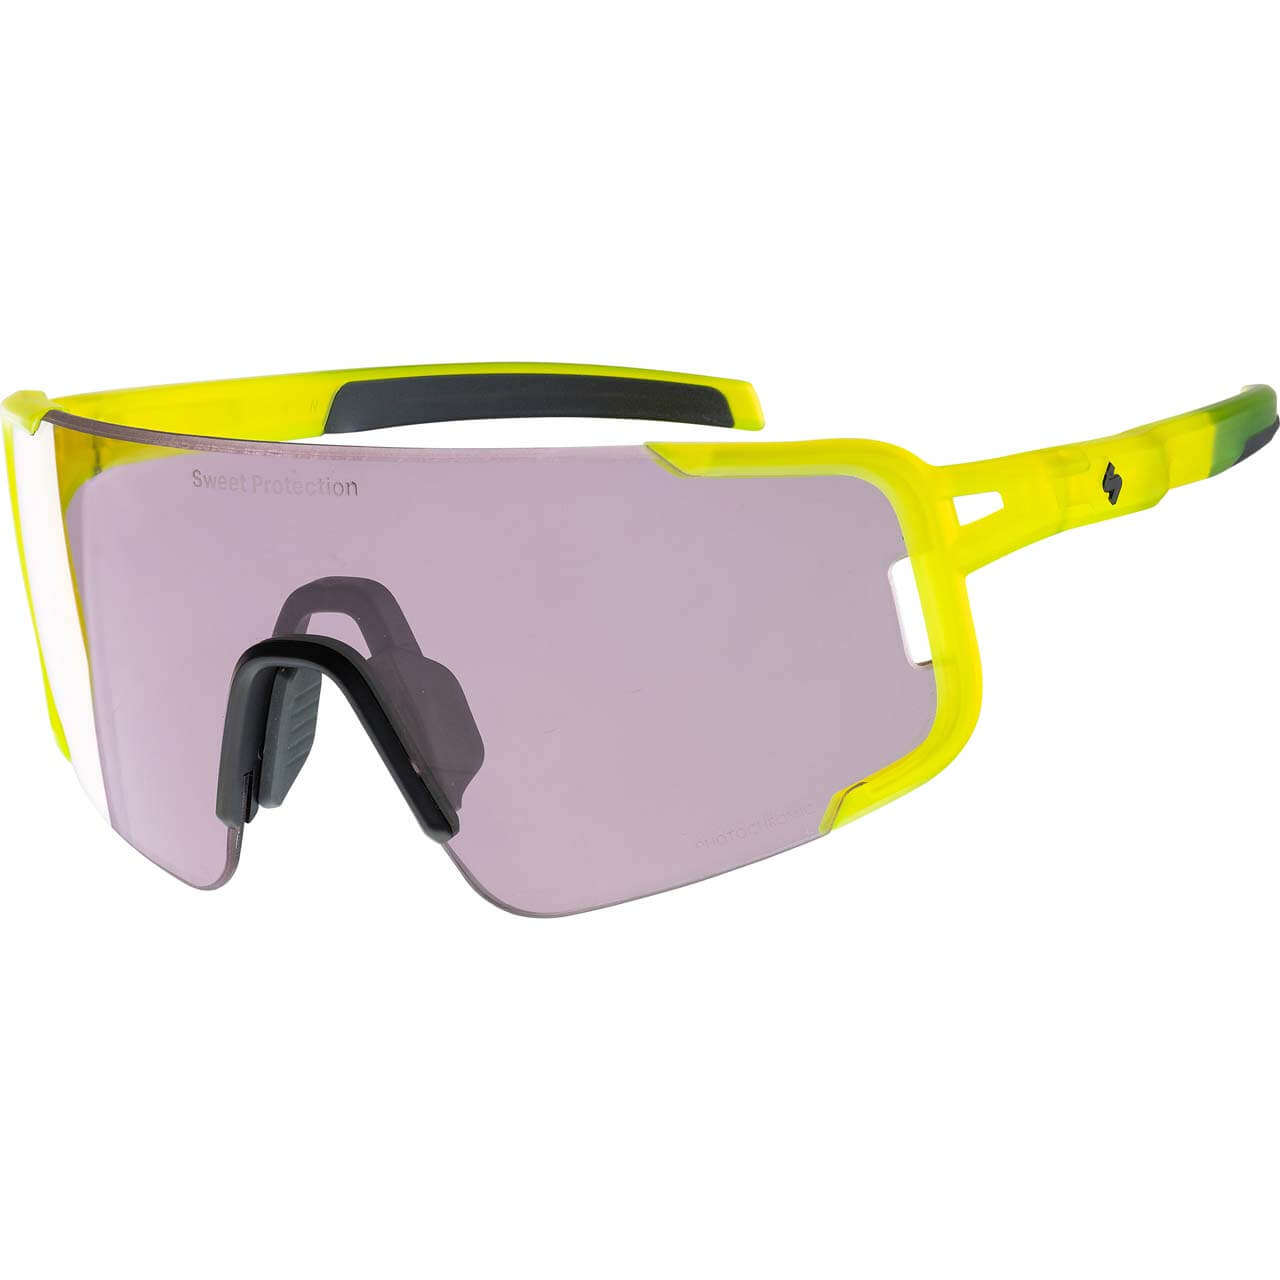 Sweet Ronin Rig Photochromic - Matte Crystal Fluo von Sweet Protection}